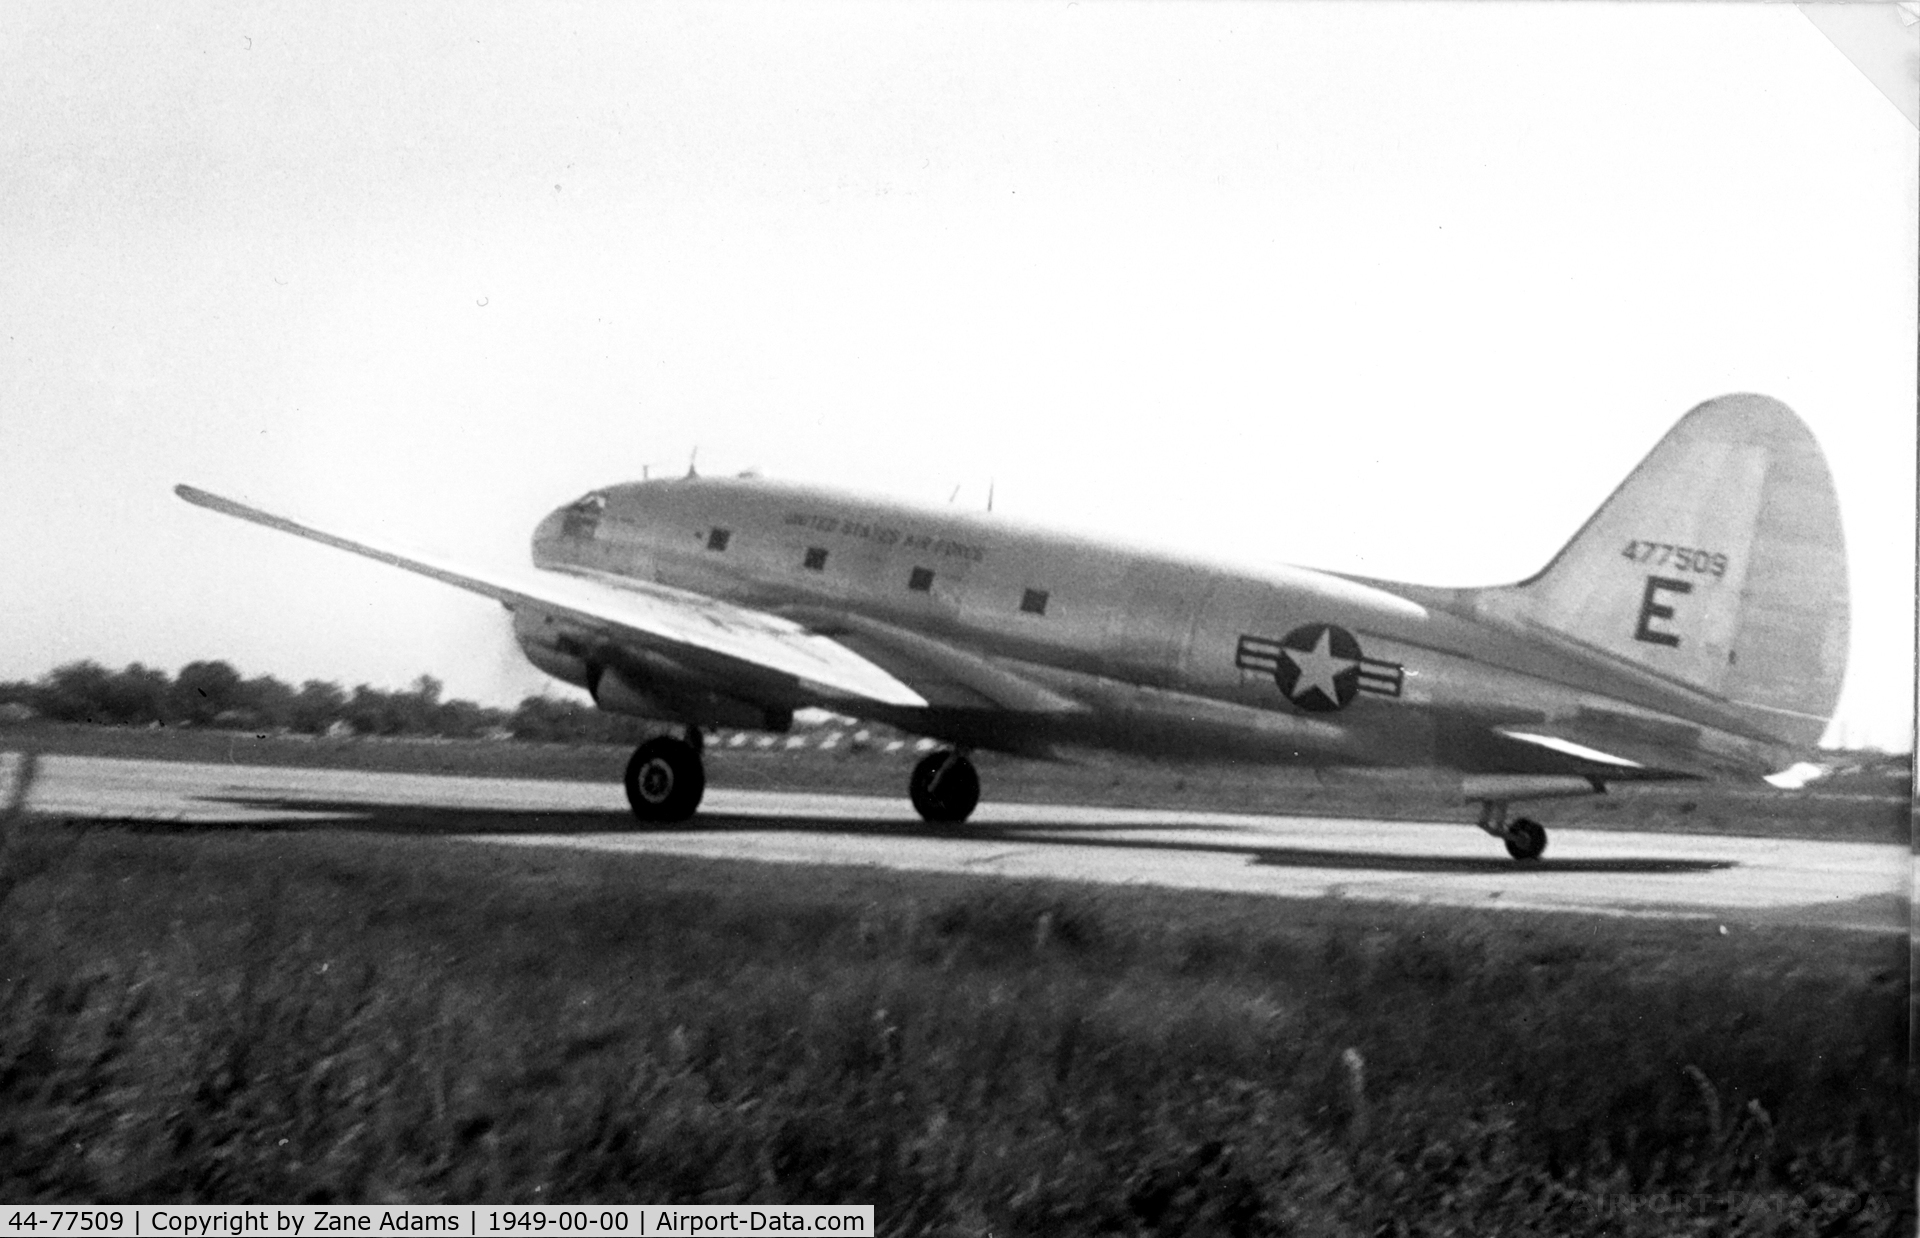 44-77509, Curtiss C-46D Commando C/N 32905, C-46 at the former Lowry AFB -  to Japan Air Self Defence Force (JASDF) as 71-1131 in 1957, to Seletar Air Services in 1977 as N54512.  Leased to OASIS from Jun 1978 as RP-C-184.  Derelict by 1990.  To Manila Air Transport Services in 1991, broken up in 1